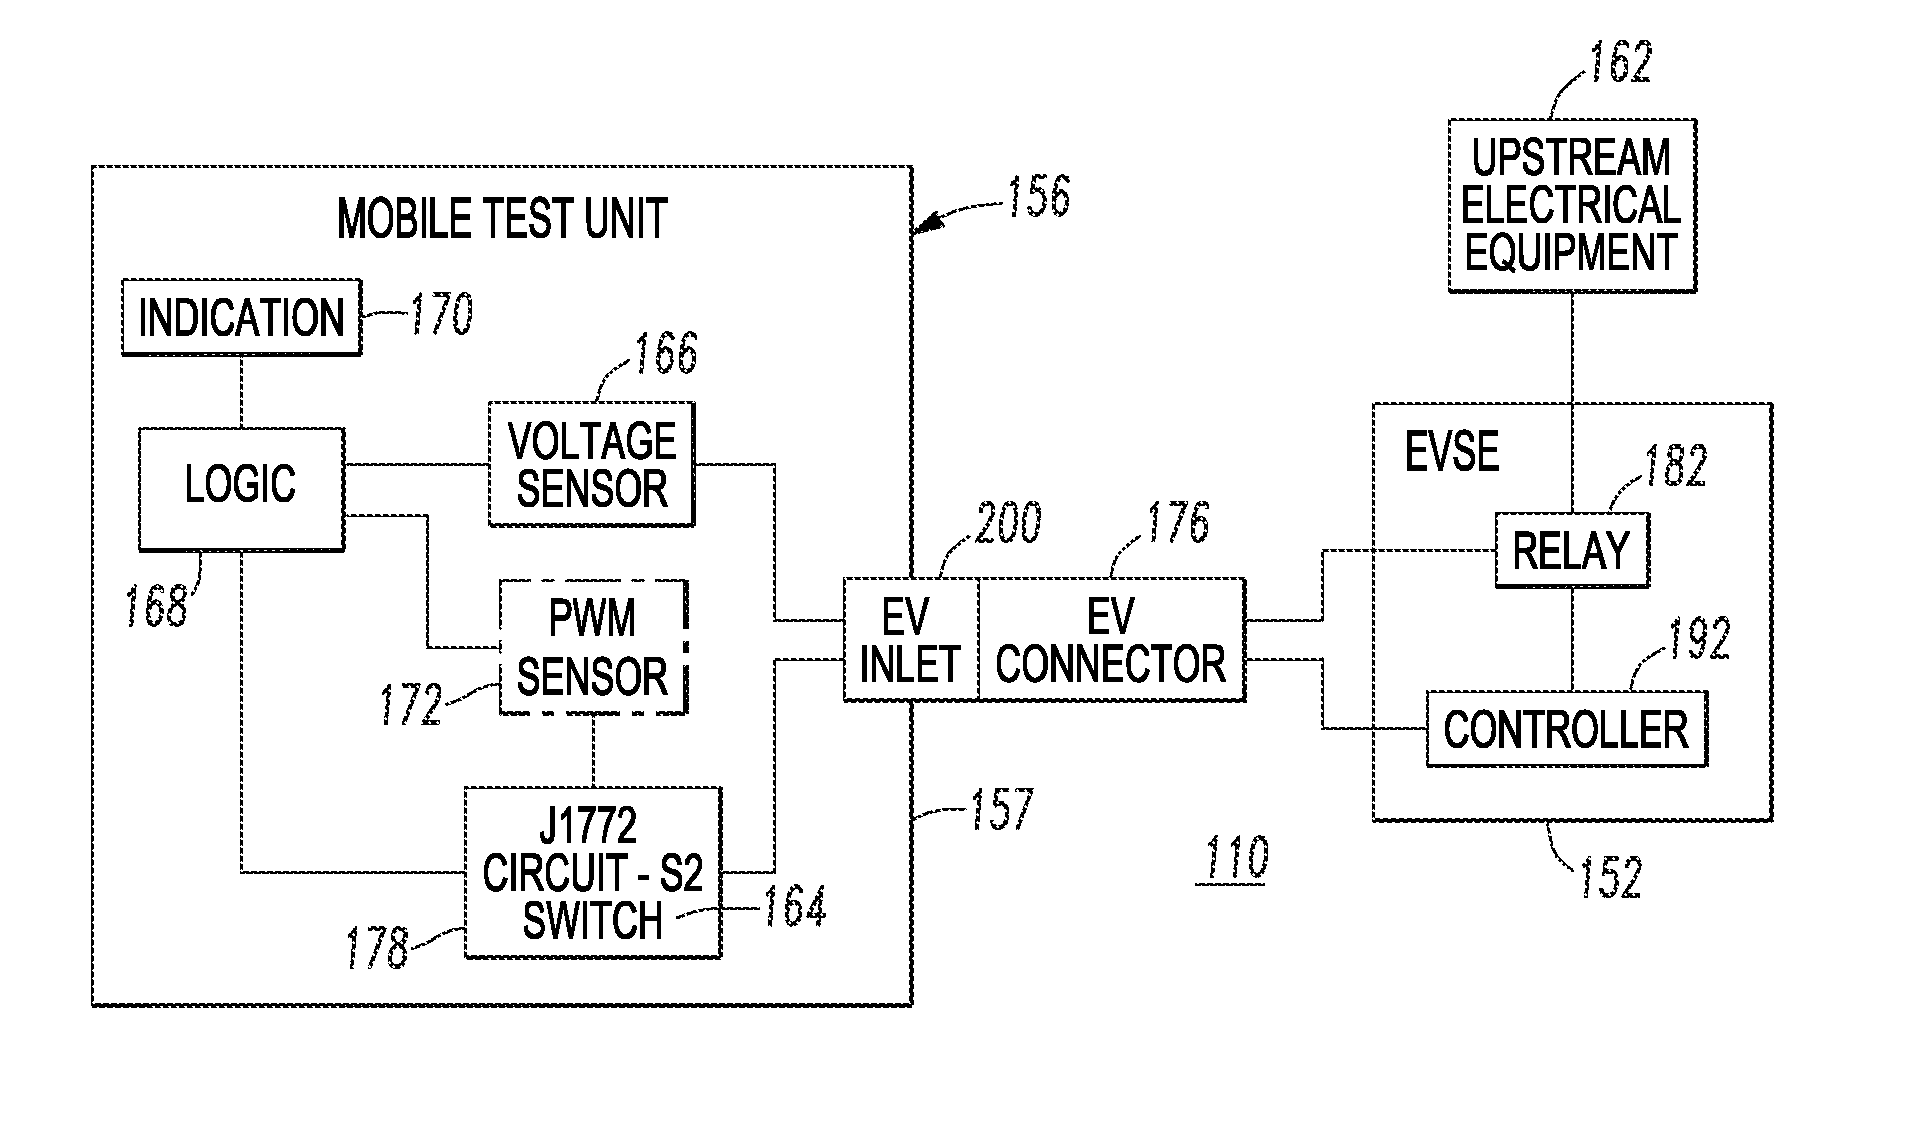 Electric vehicle supply equipment testing apparatus